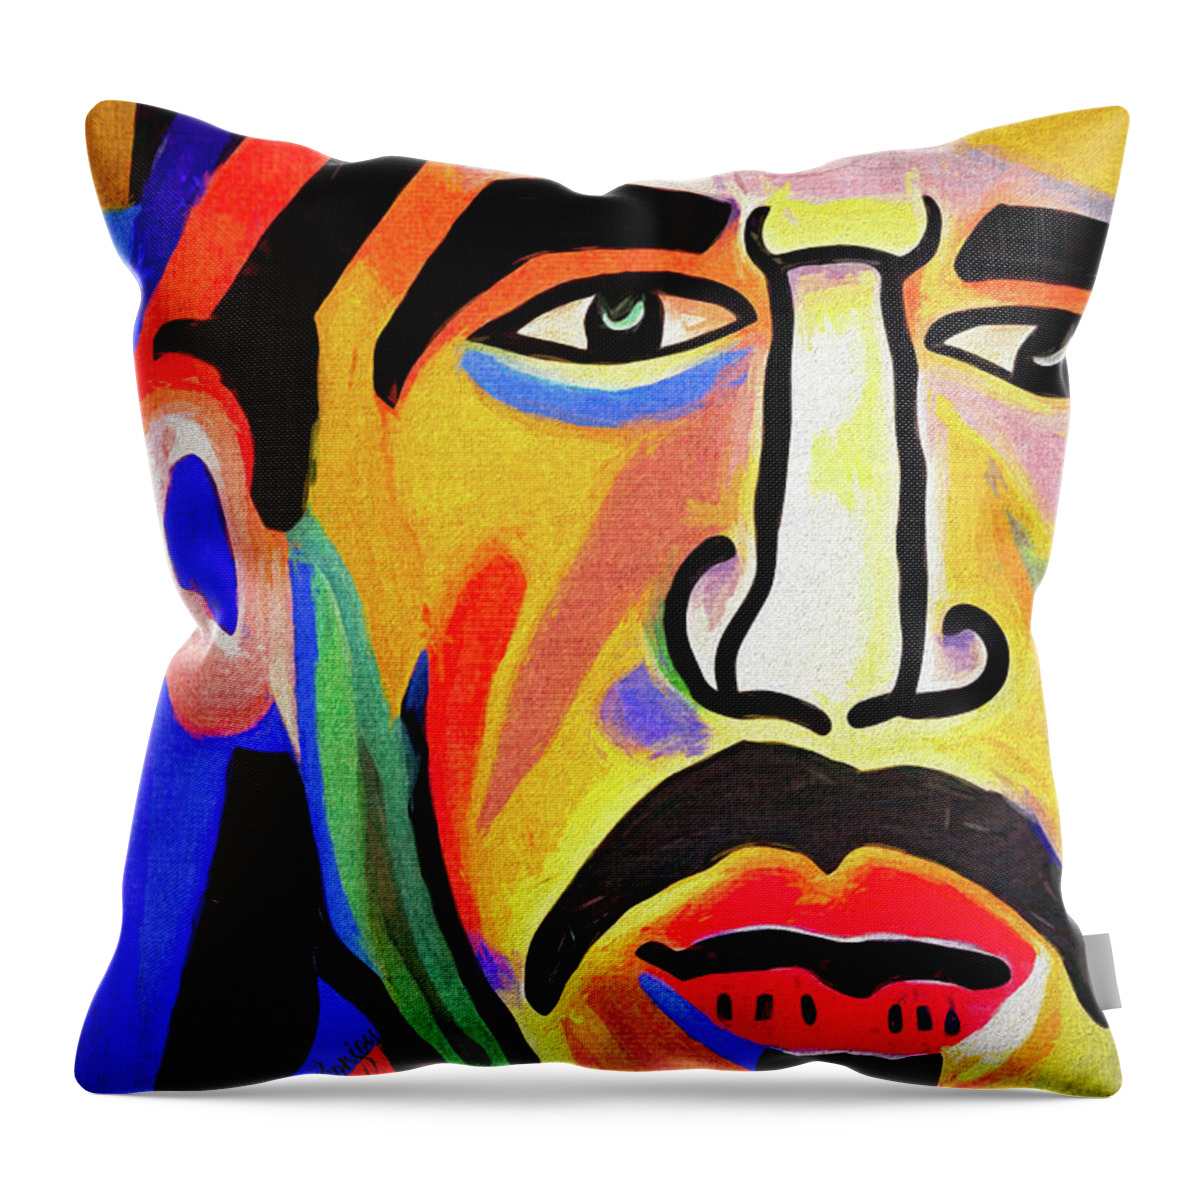 Anthony Throw Pillow featuring the digital art Anthony Kiedis by Bonny Puckett